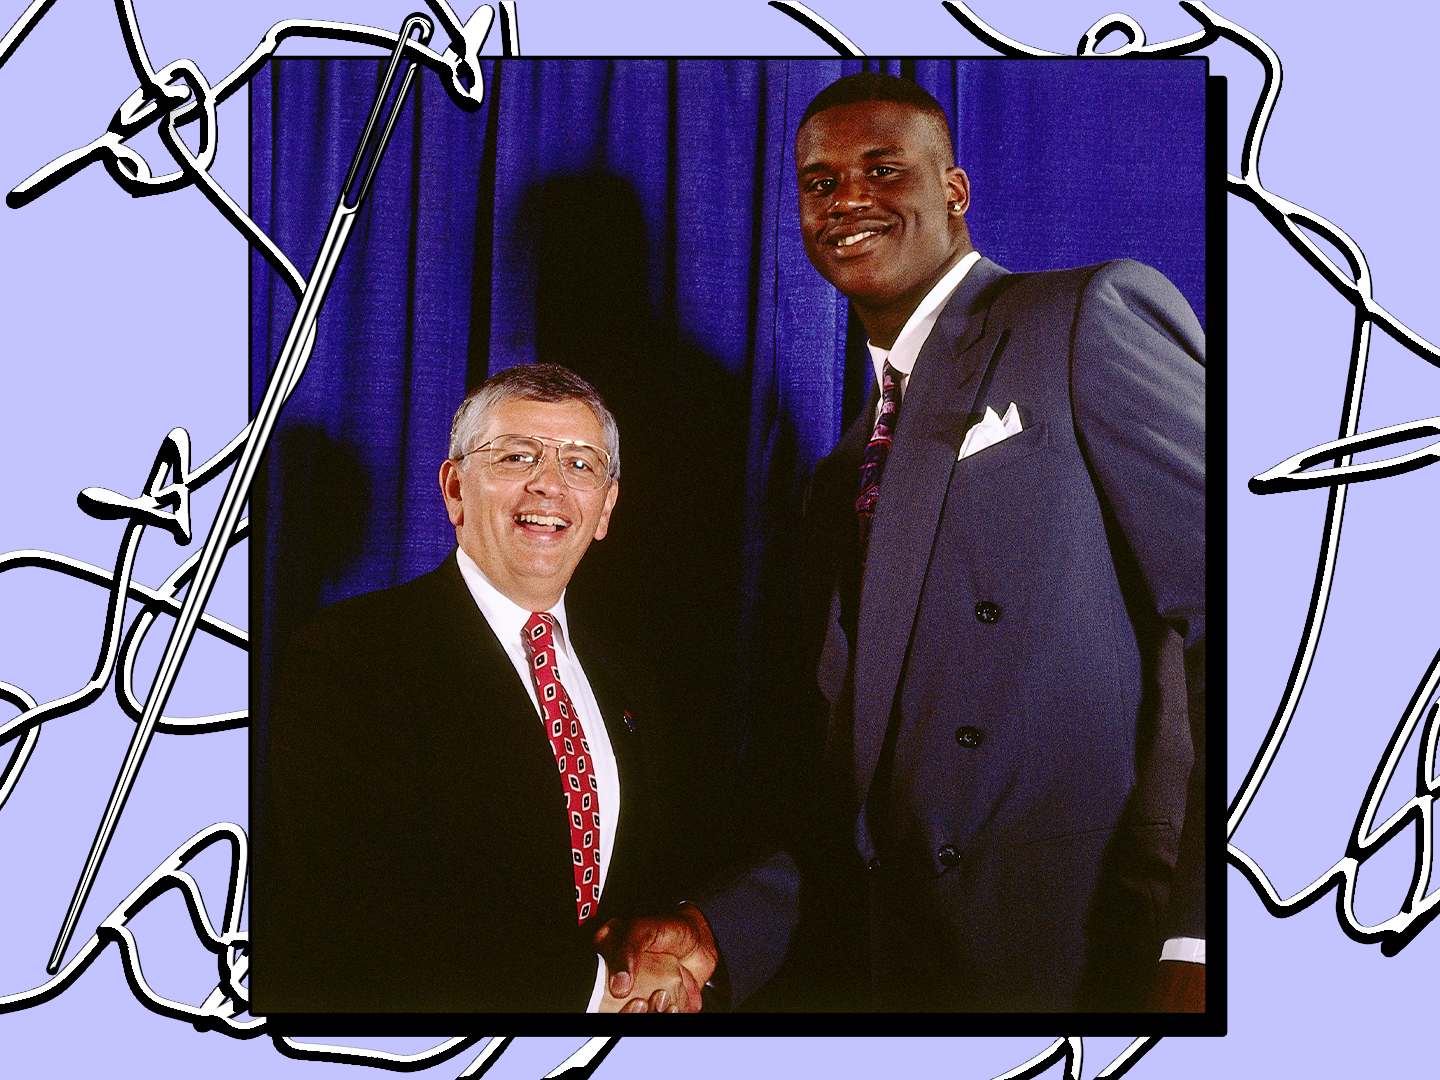 Image may contain Shaquille O'Neal David Stern People Person Accessories Formal Wear Tie Clothing Suit and Blazer